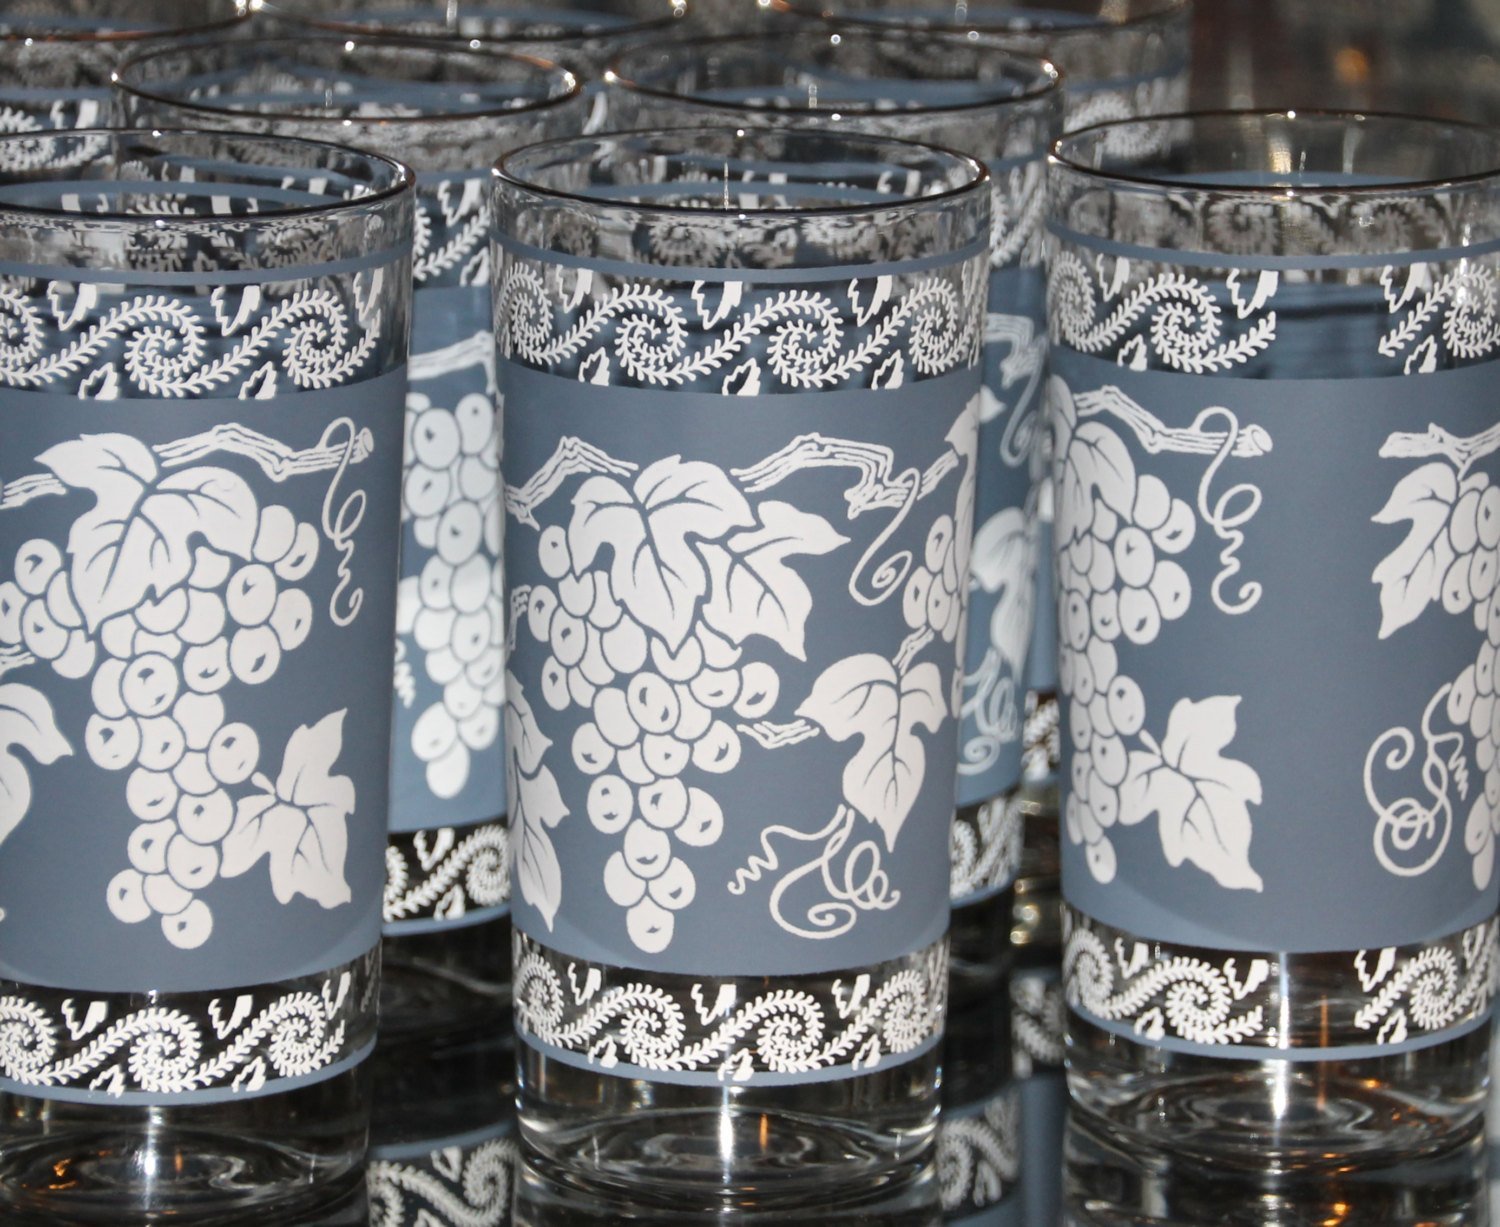 https://scotch-street-vintage.myshopify.com/cdn/shop/products/vintage-glassware-of-tall-tumbler-glasses-1960s-anchor-hocking-blue-and-white-grape-pattern-with-silver-rim-set-of-8-barware-434354.jpg?v=1604509046